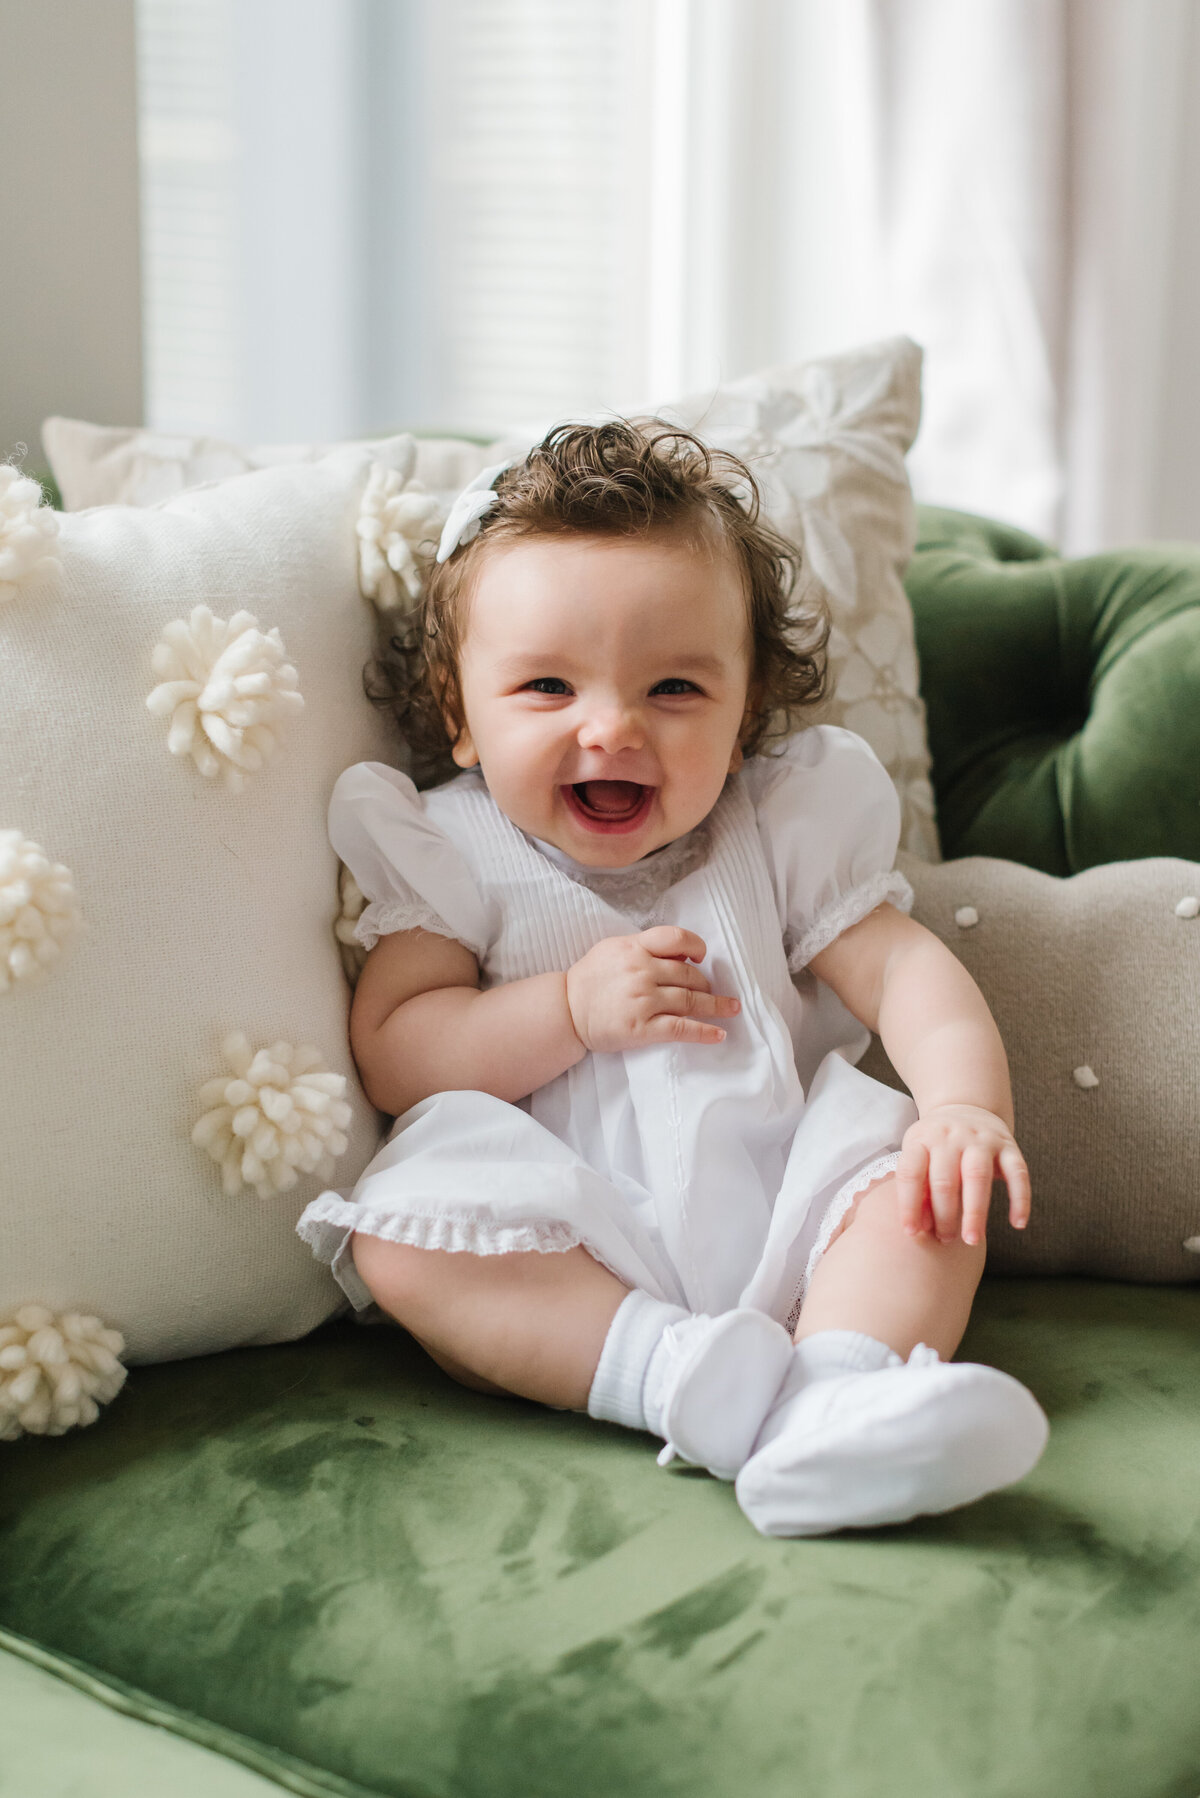 Baby giggling and sitting on green couch in white dress